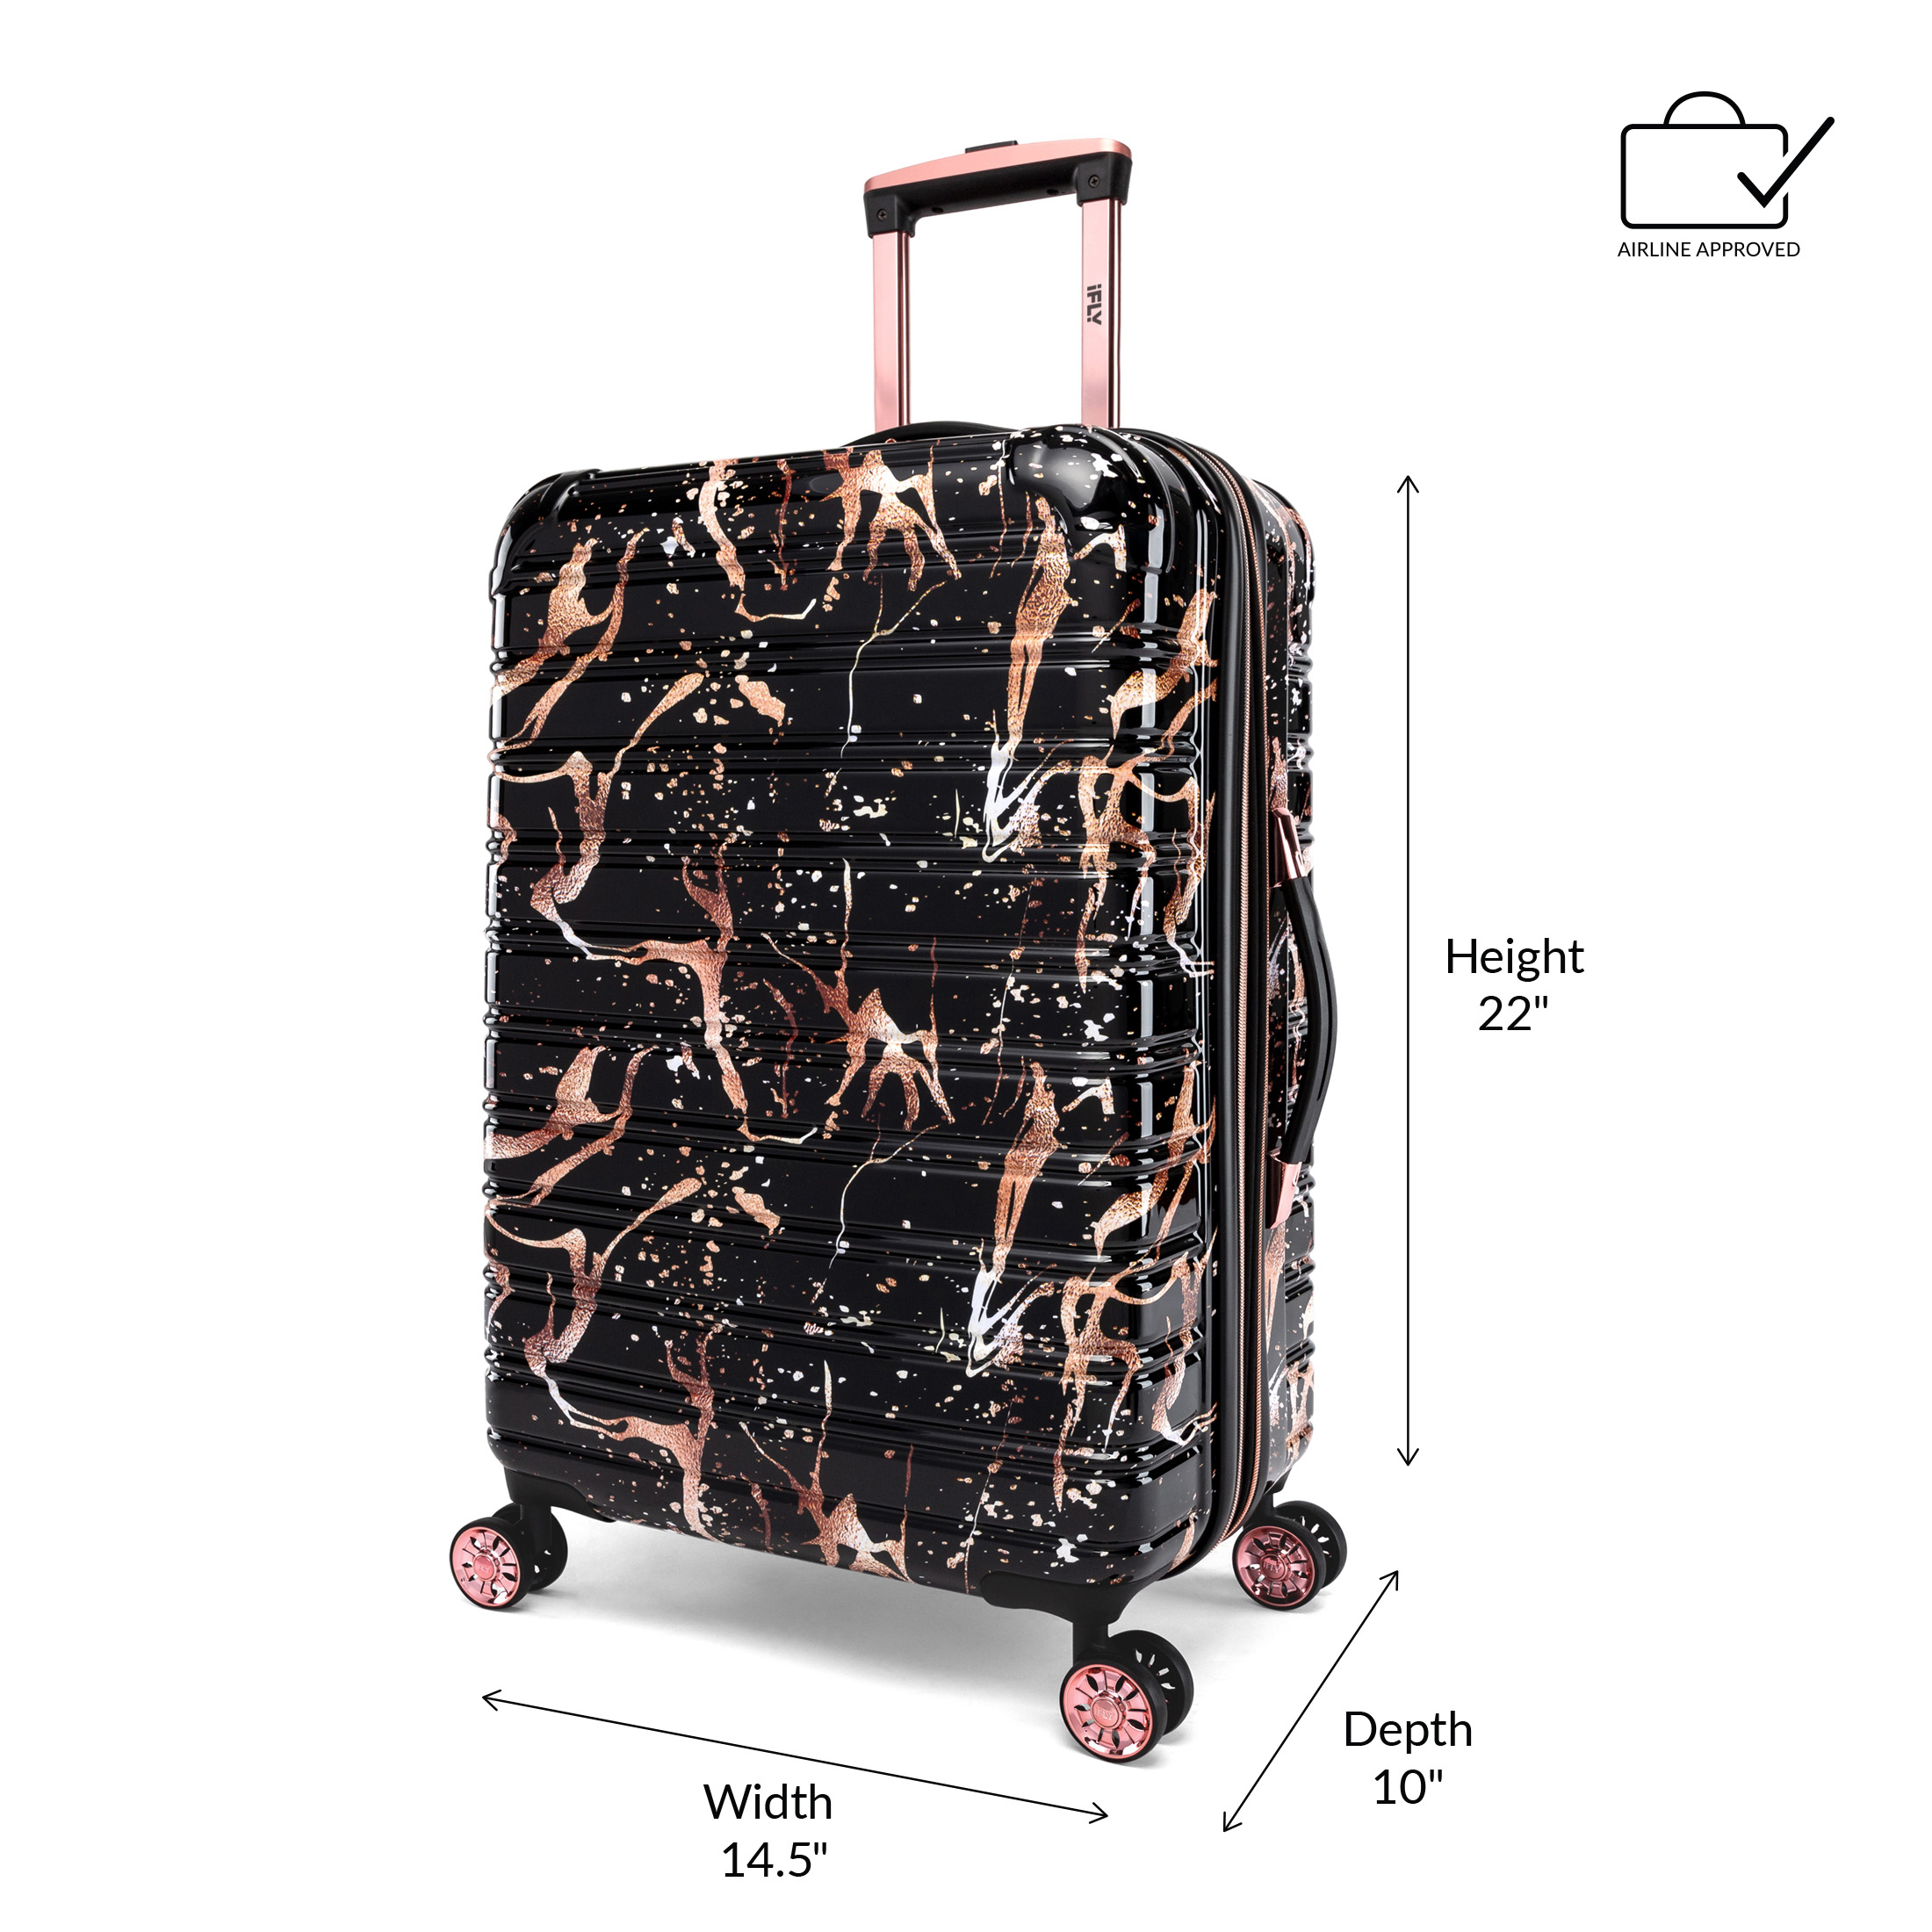 IFLY - Fibertech Marble Hardside Luggage 20 Inch Carry-on,  Black/Rose Gold - image 3 of 7